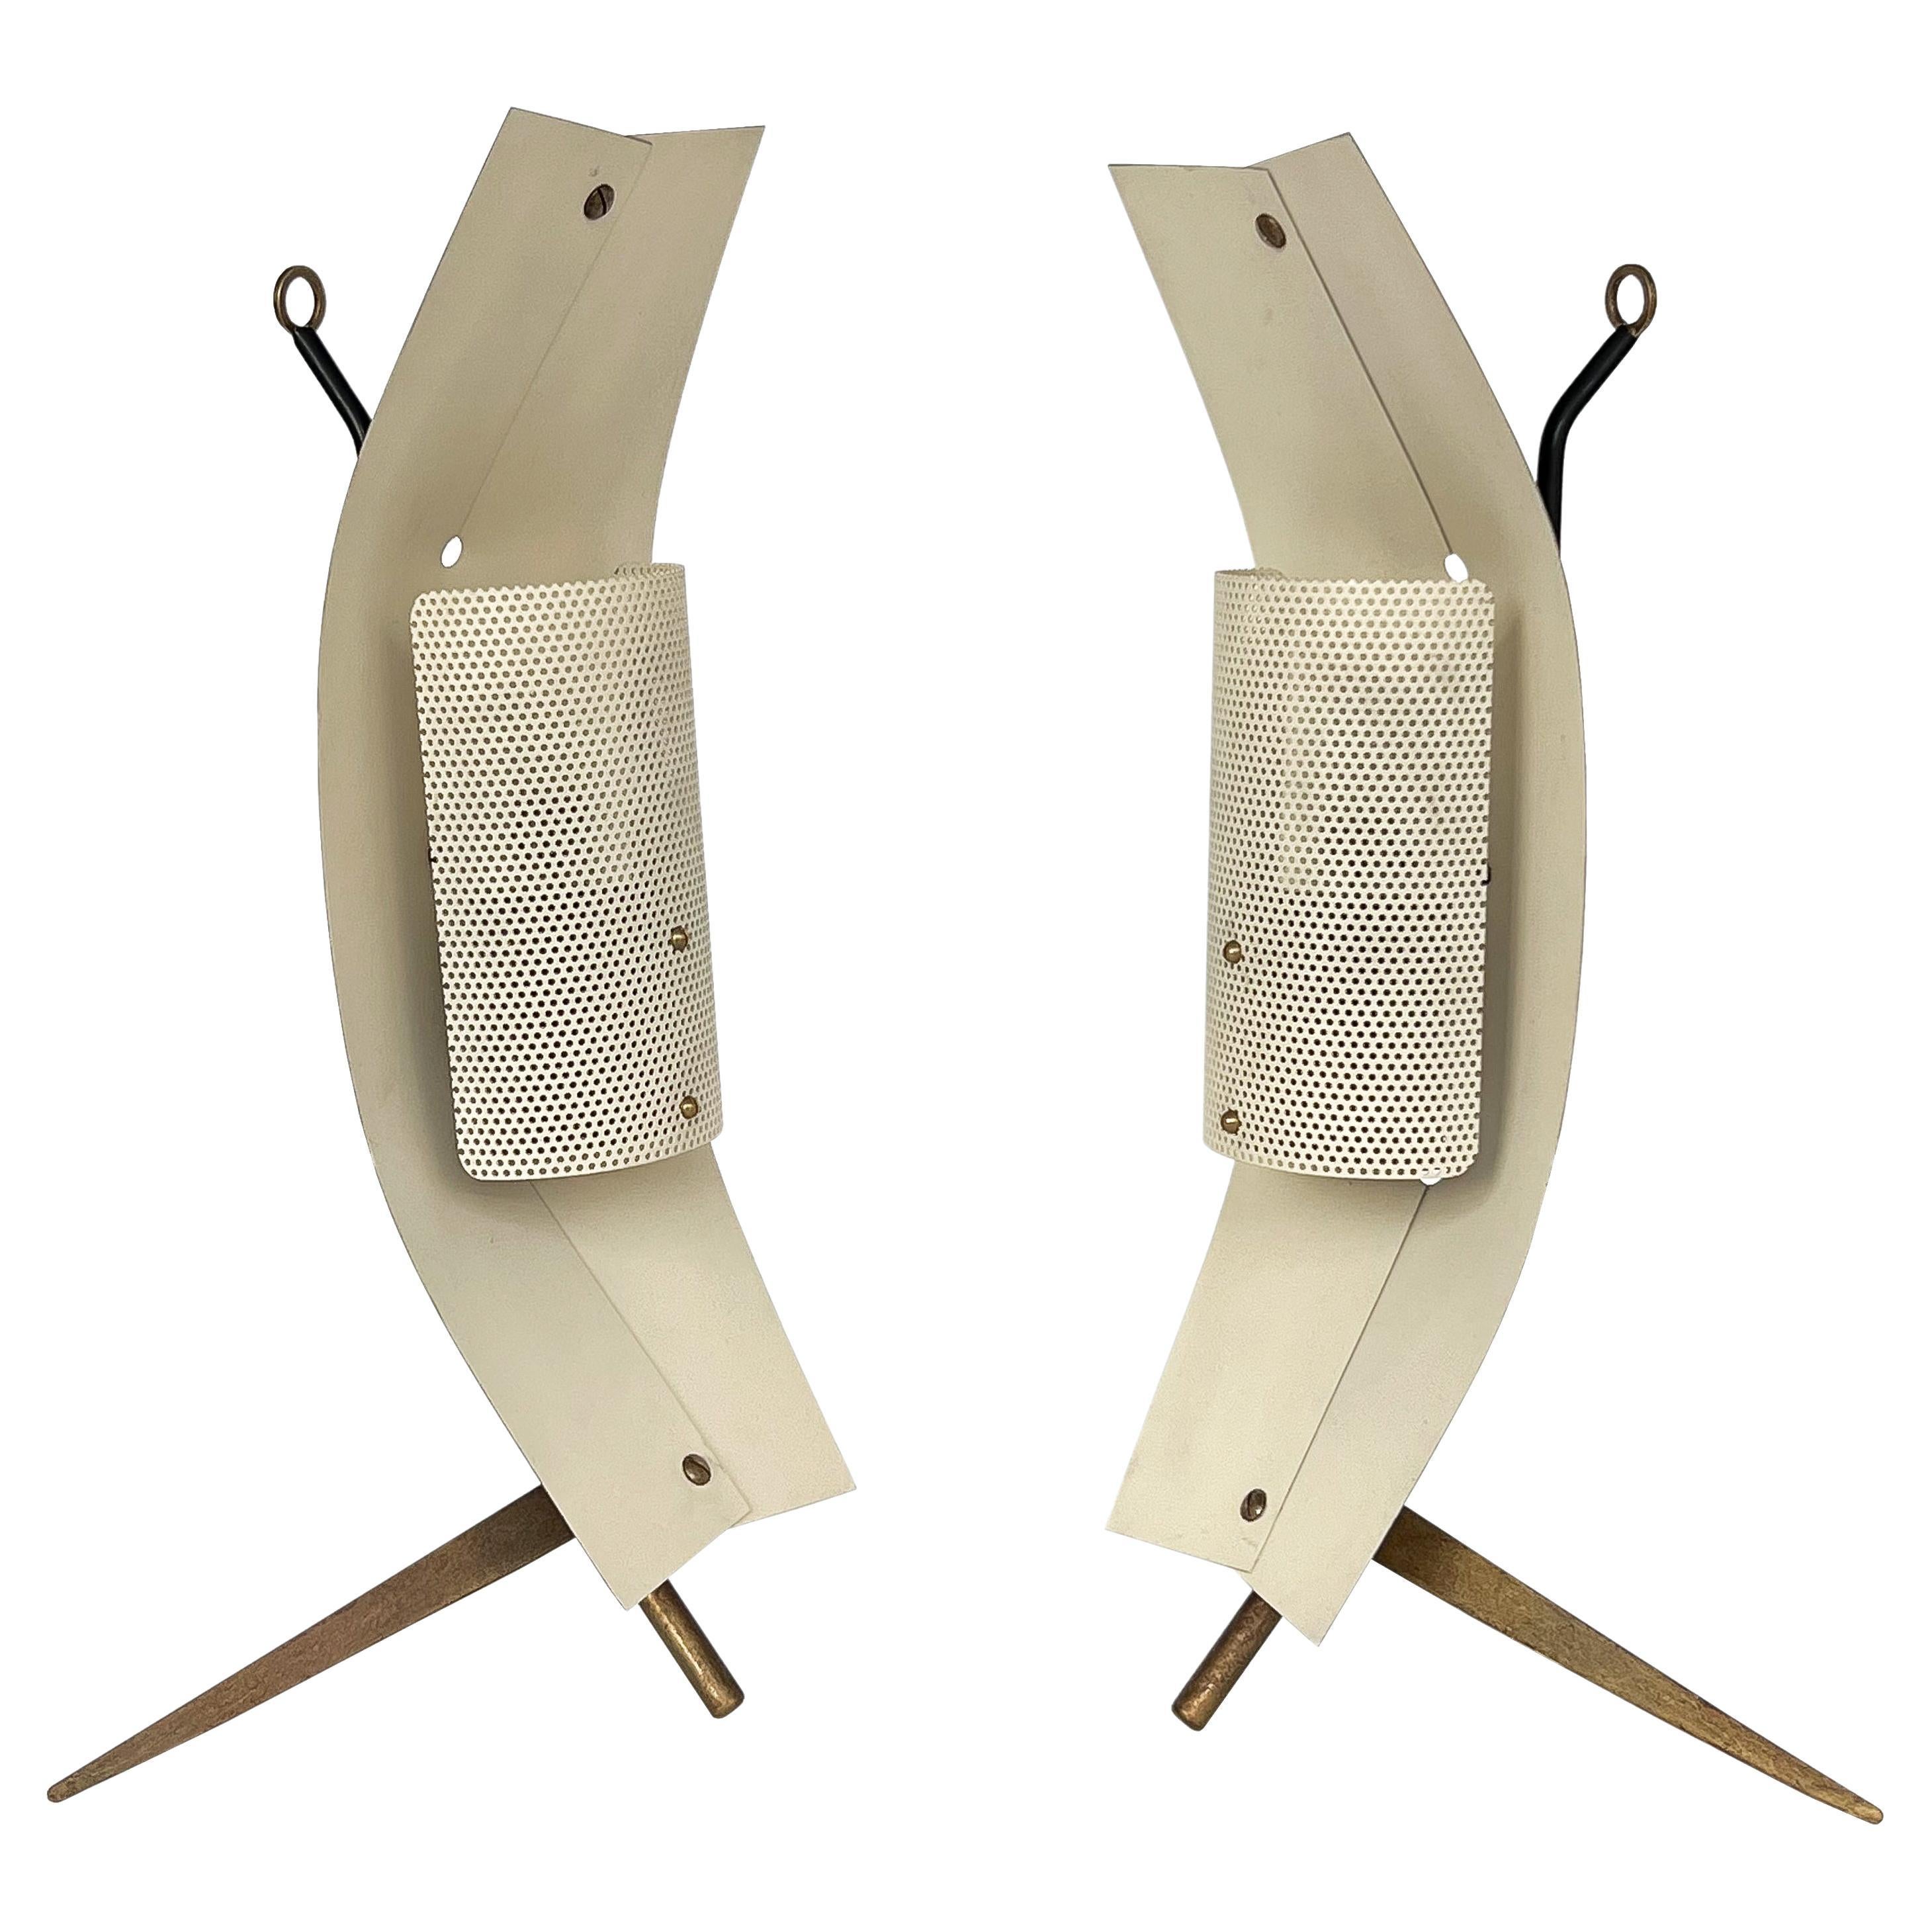 Pair Gastone Colliva Modernist Table Lamps / Wall Sconces